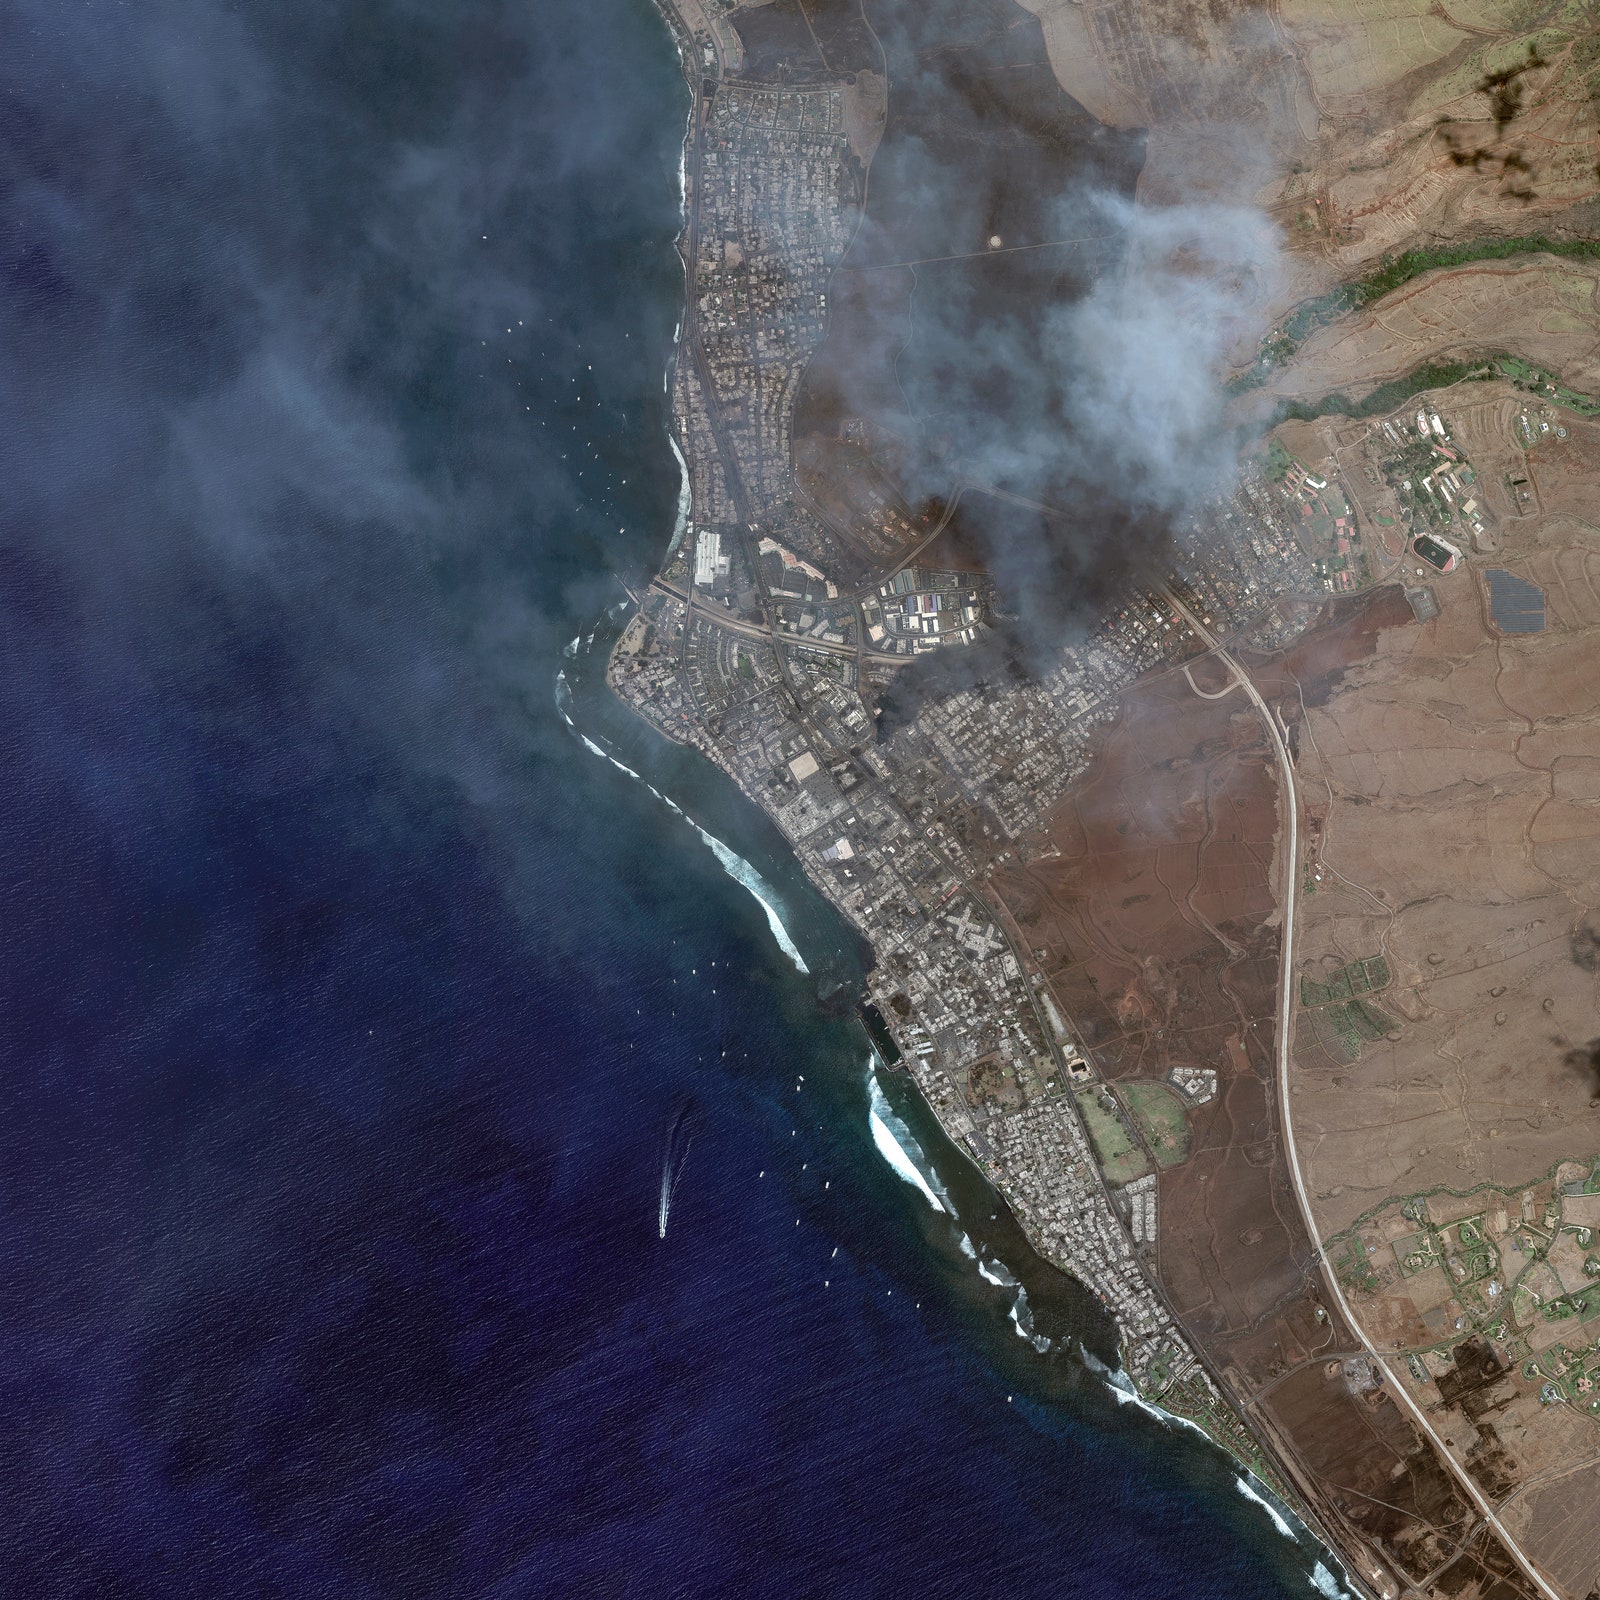 What Travelers Should Know About Maui's Devastating Wildfires